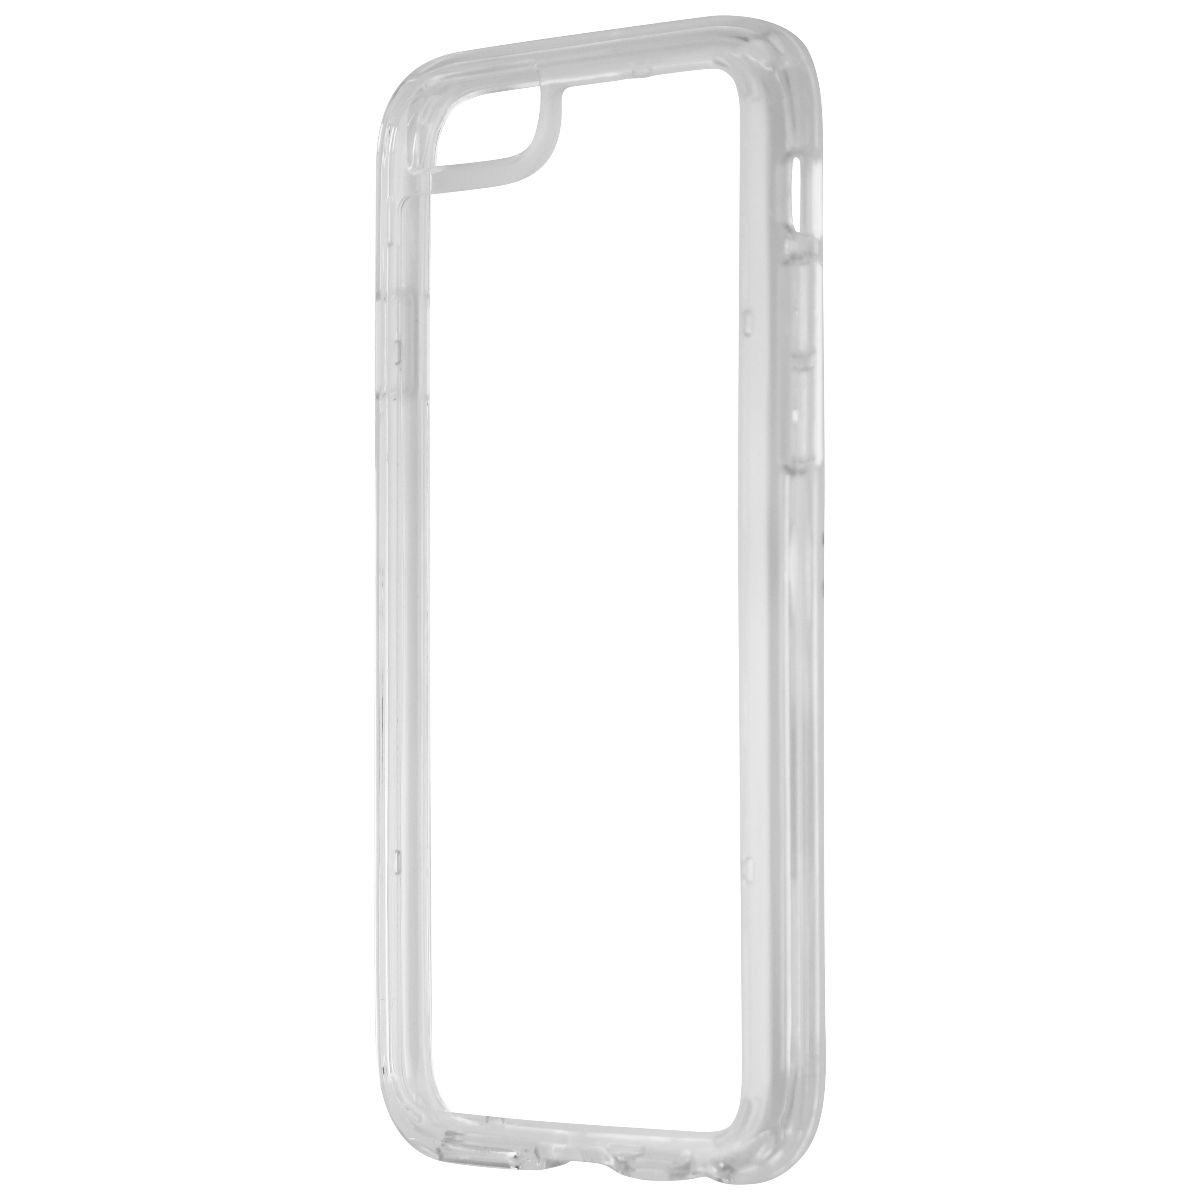 UBREAKIFIX Hardshell Case For Apple IPhone 6/6s - Clear